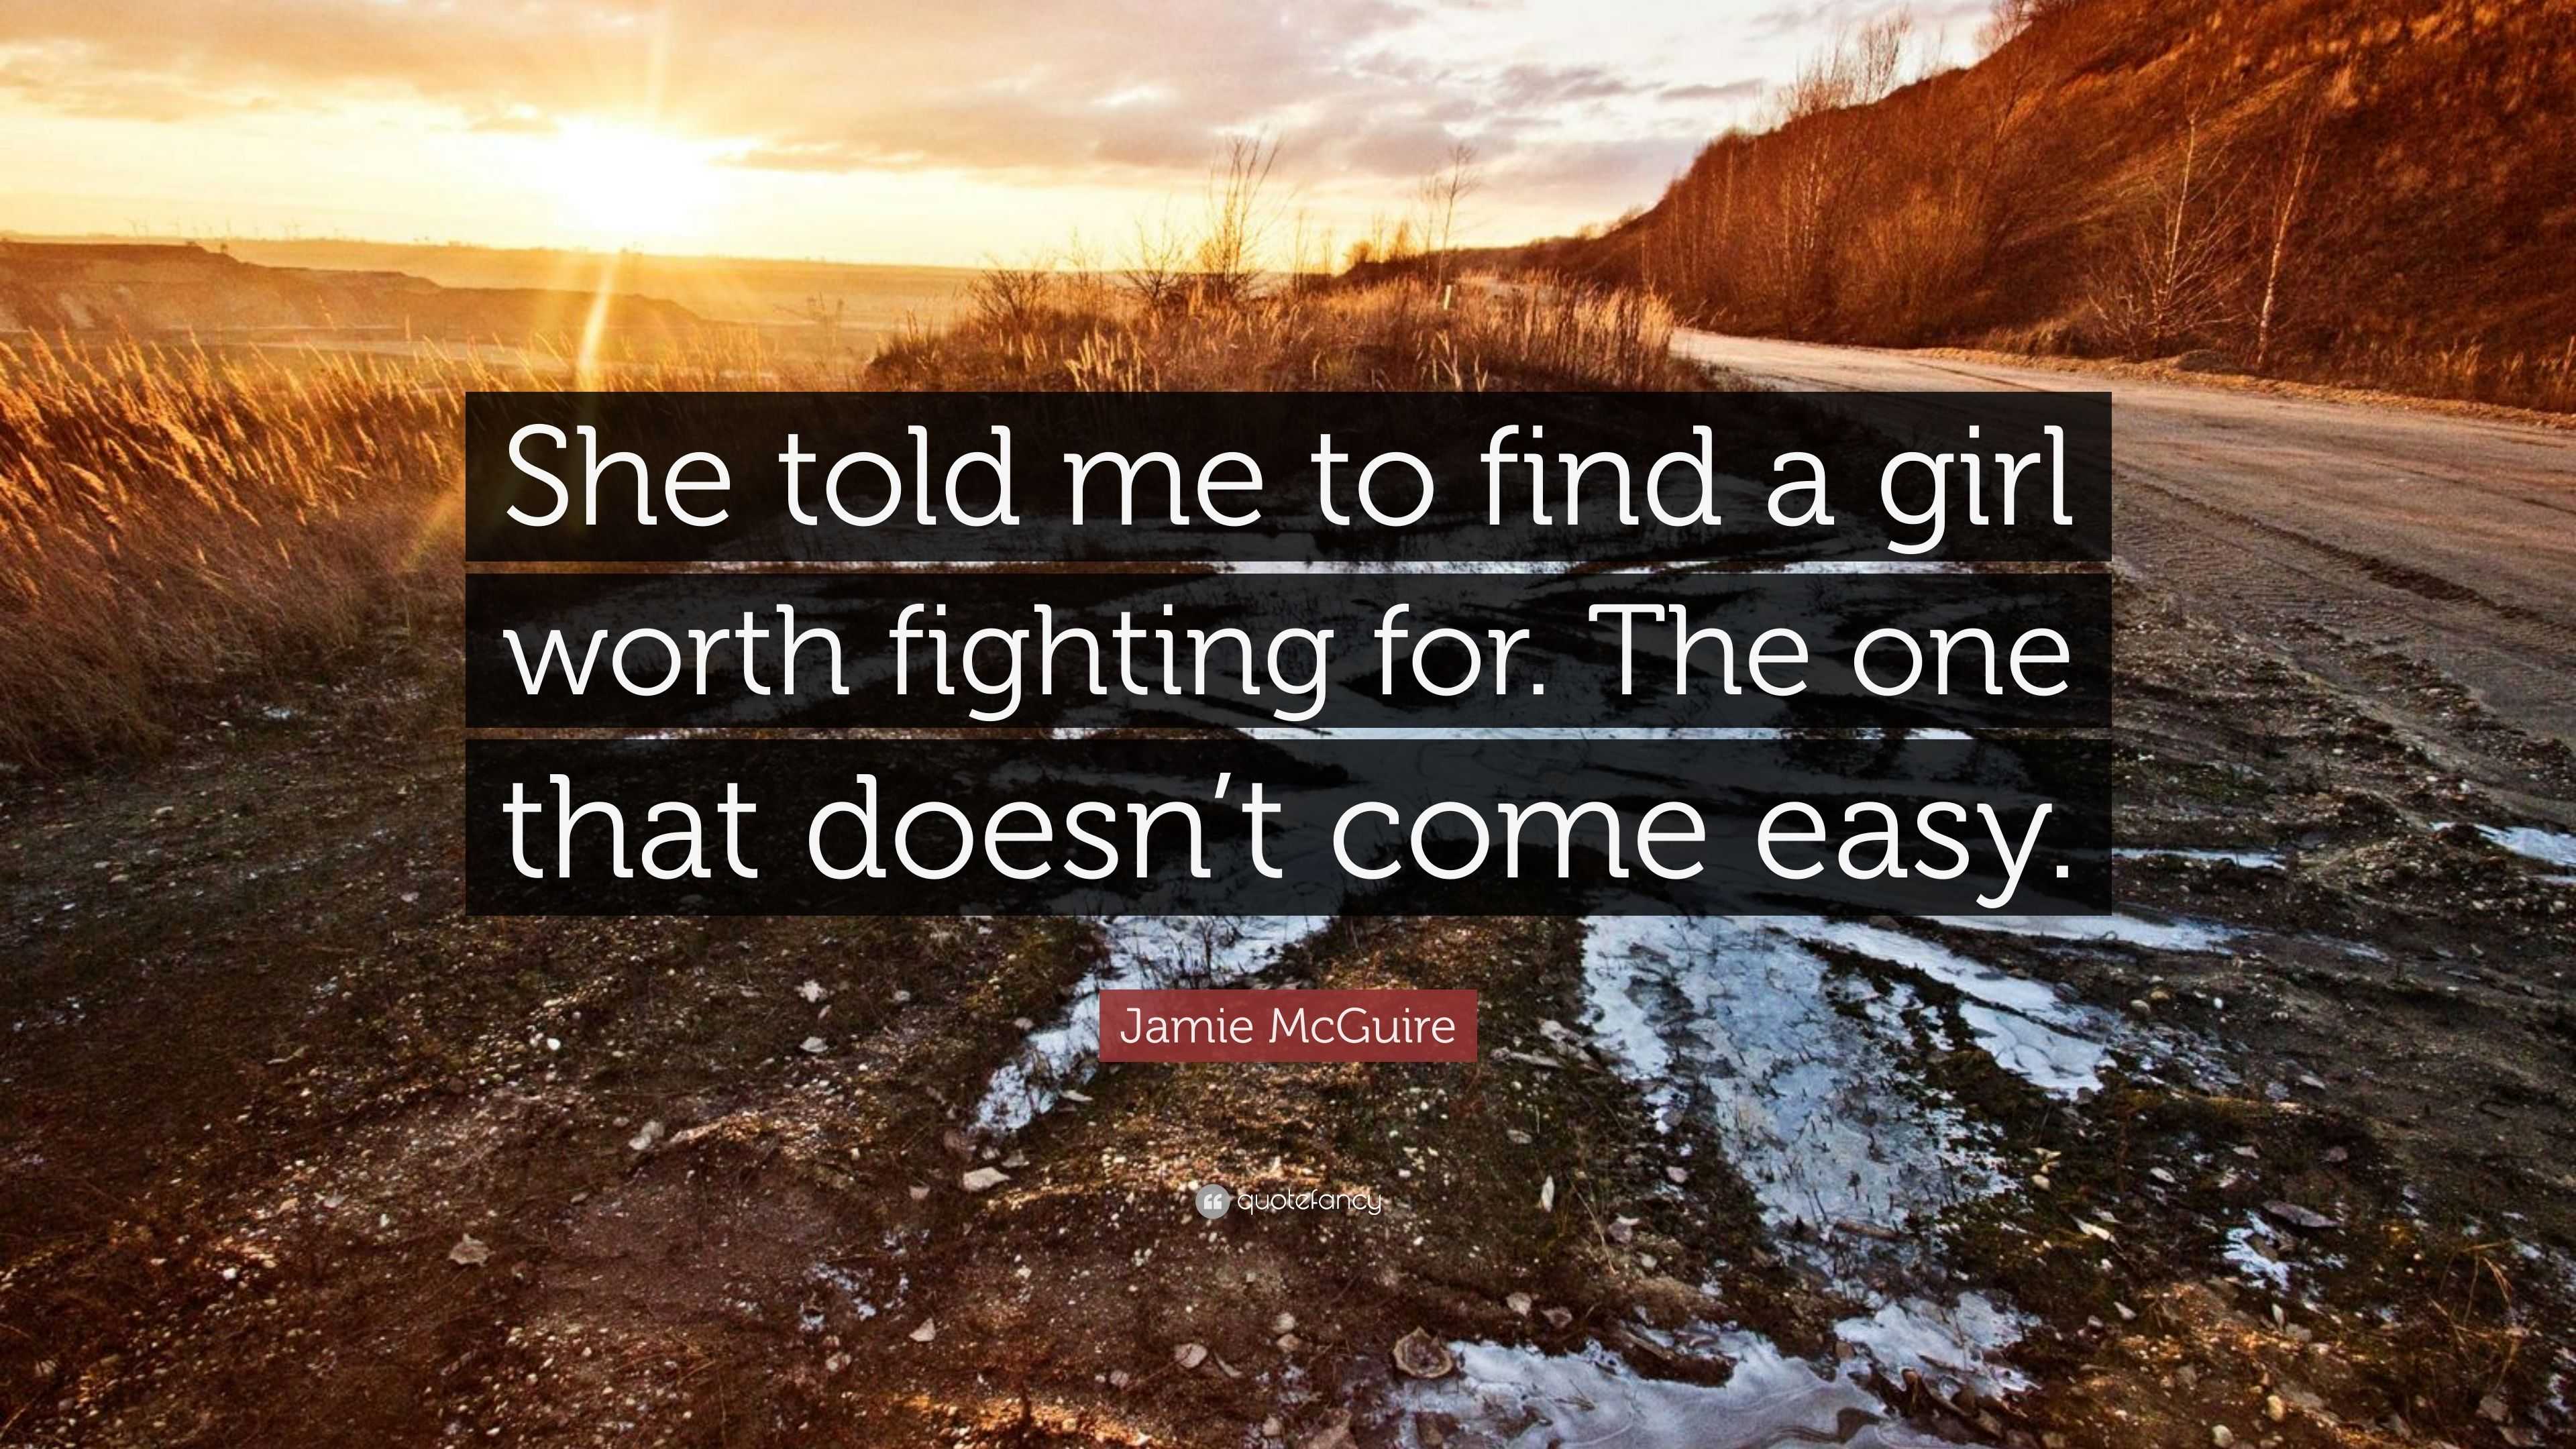 https://quotefancy.com/media/wallpaper/3840x2160/2827400-Jamie-McGuire-Quote-She-told-me-to-find-a-girl-worth-fighting-for.jpg